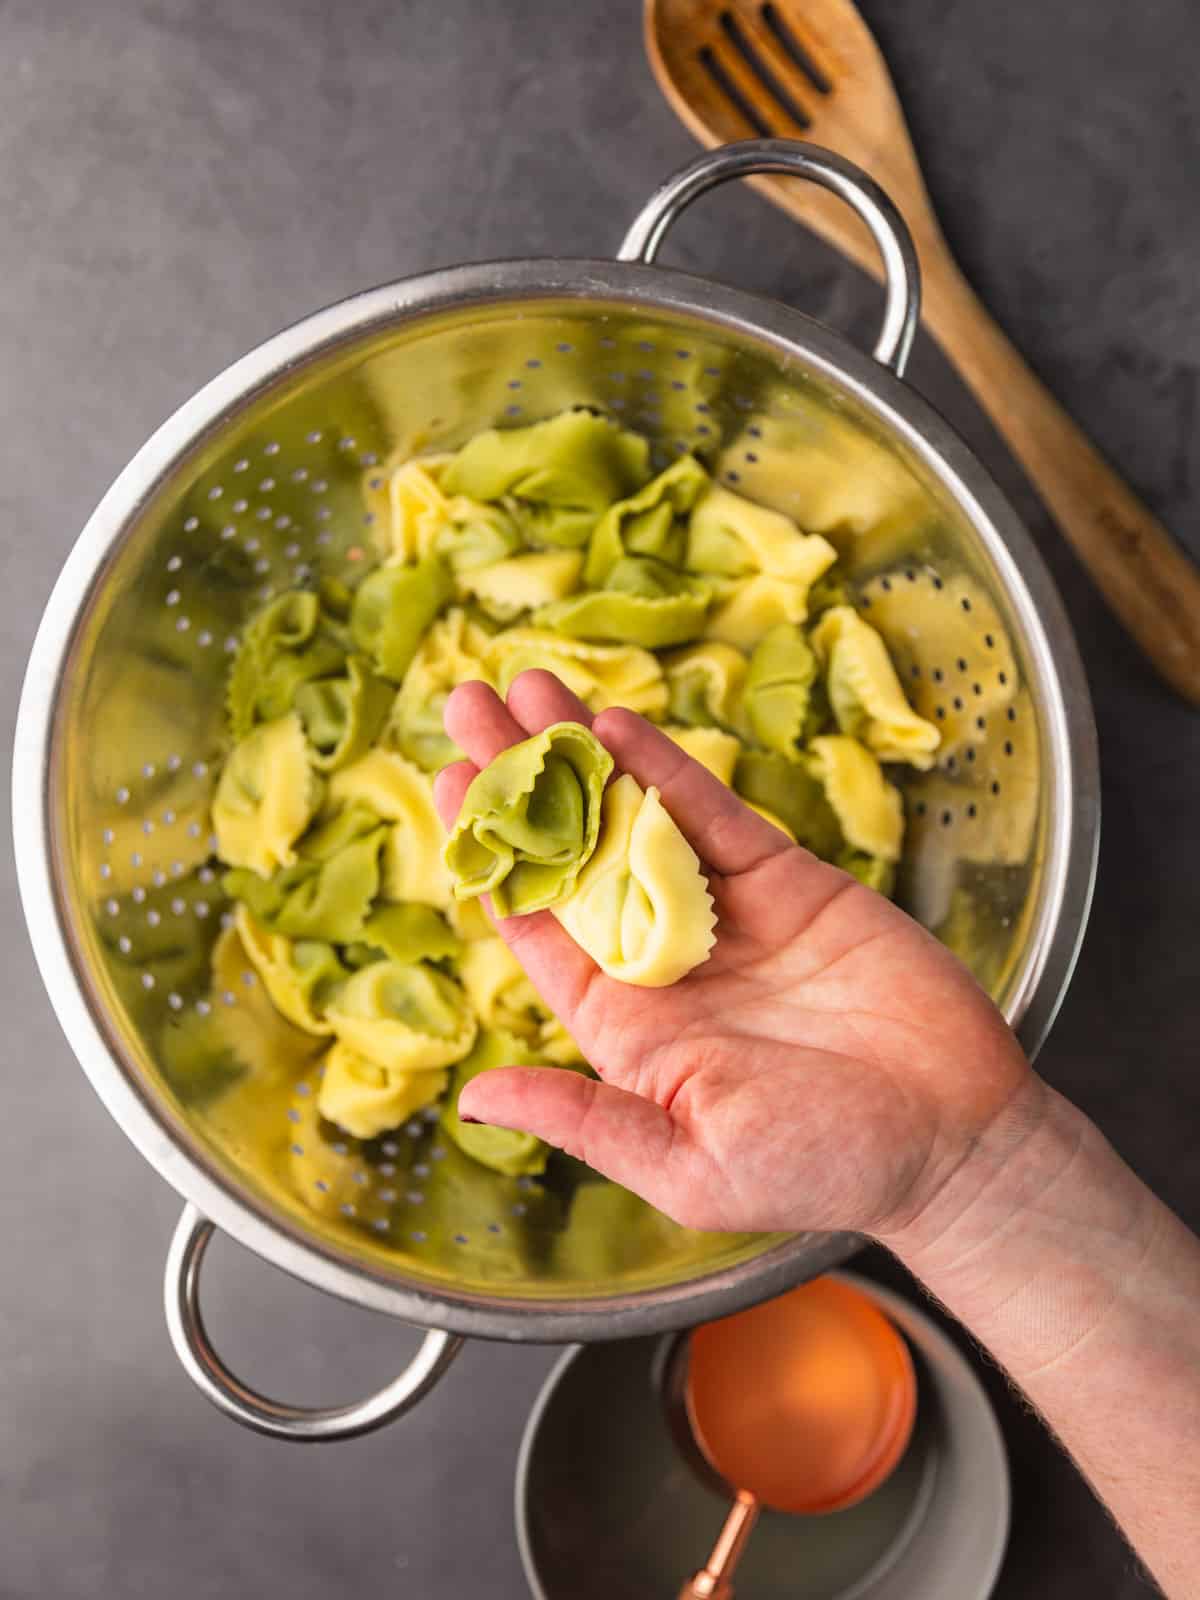 hand holding cooked pieces of green and white tortellini pasta over a colander.